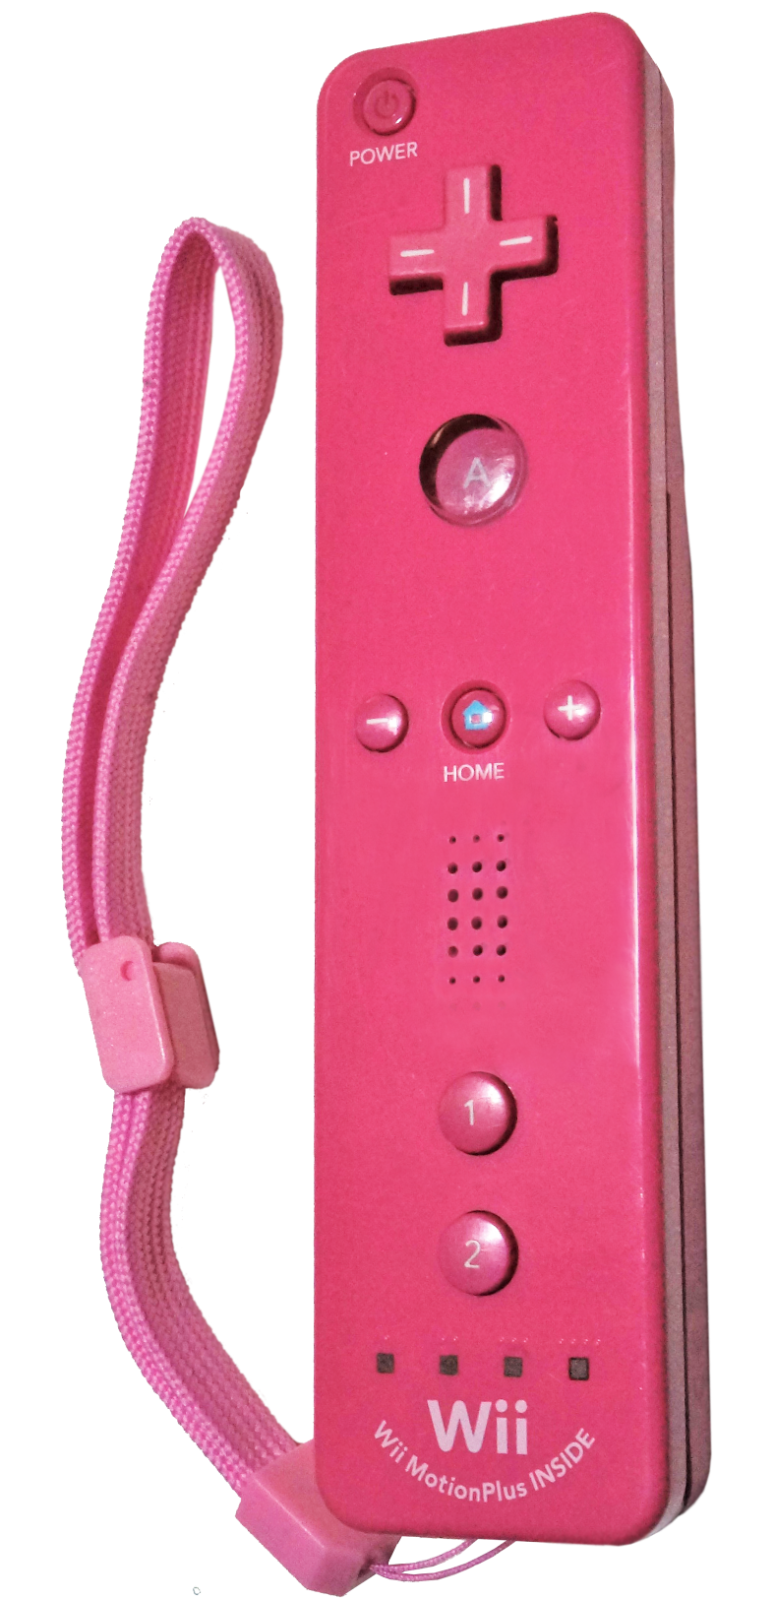 Genuine Nintendo Motionplus Wii Pink Controller Remote Wand RVL-003 Wii Motes (Preowned)